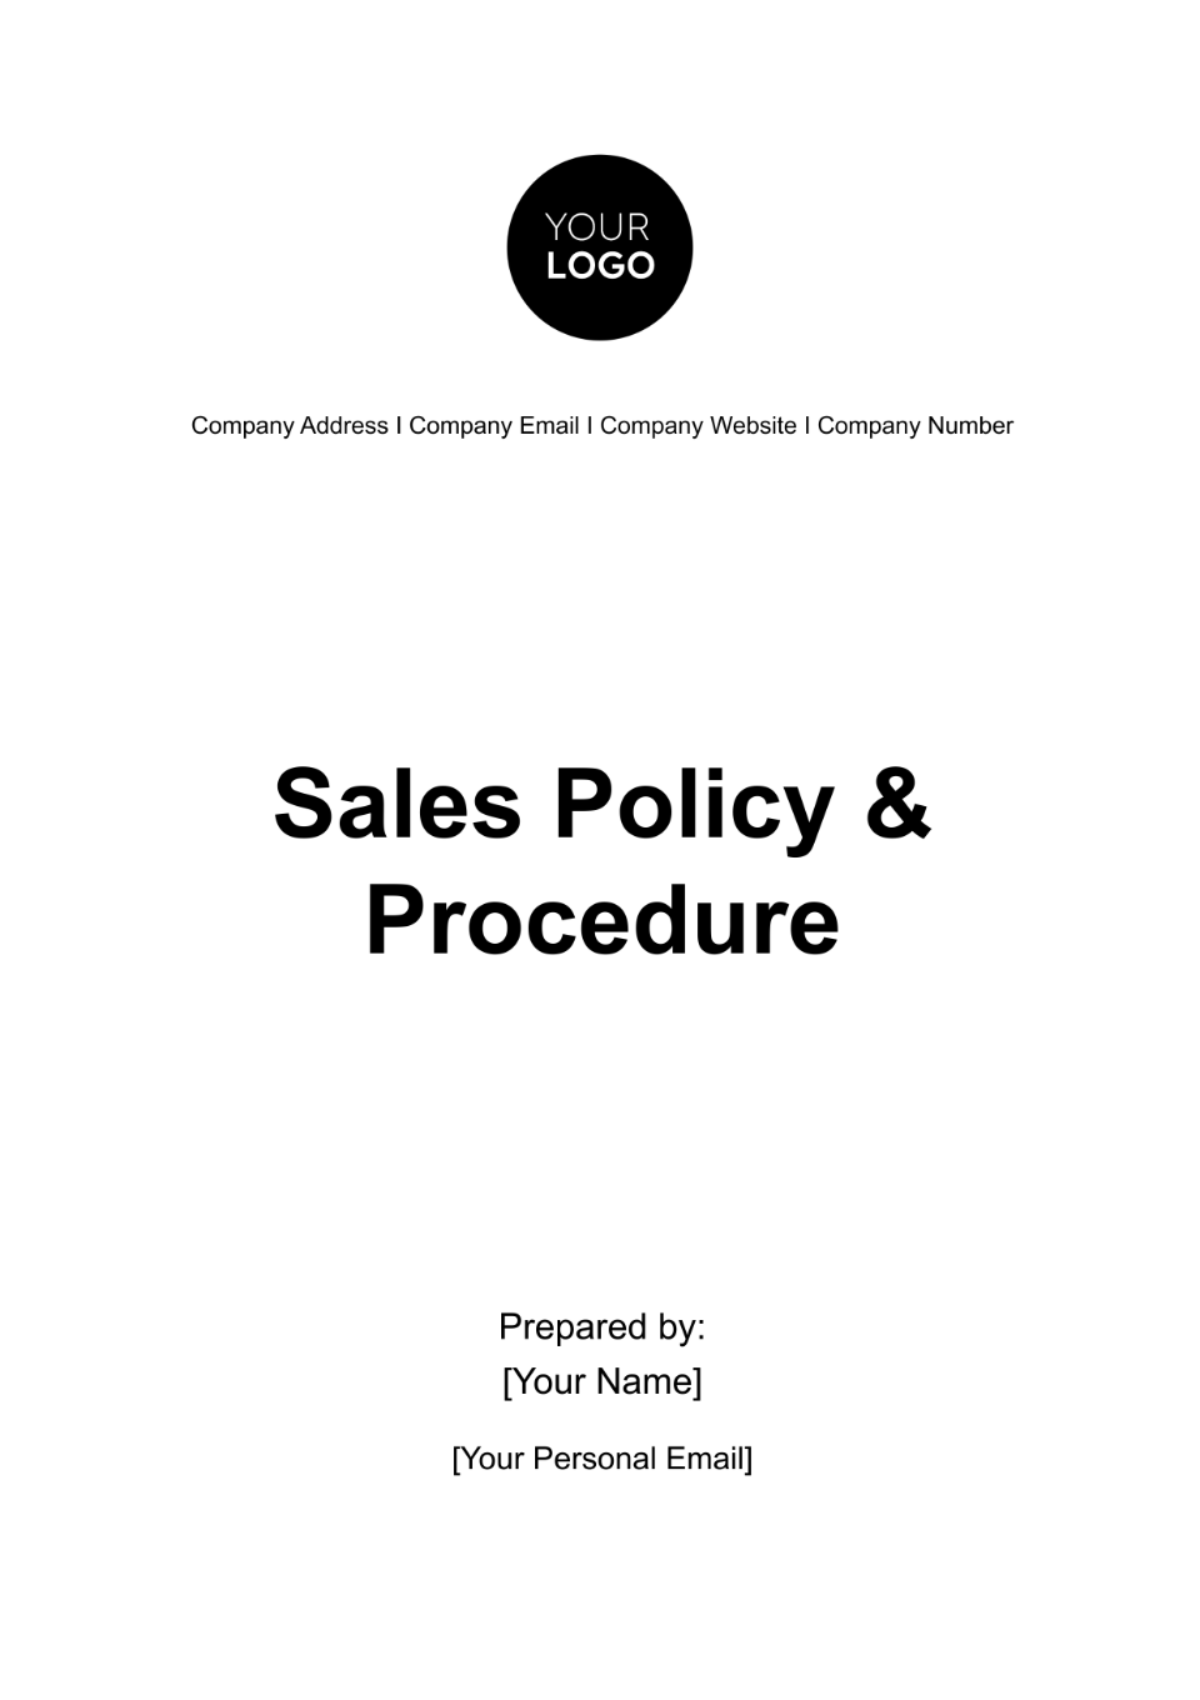 Free Sales Policy & Procedure Template